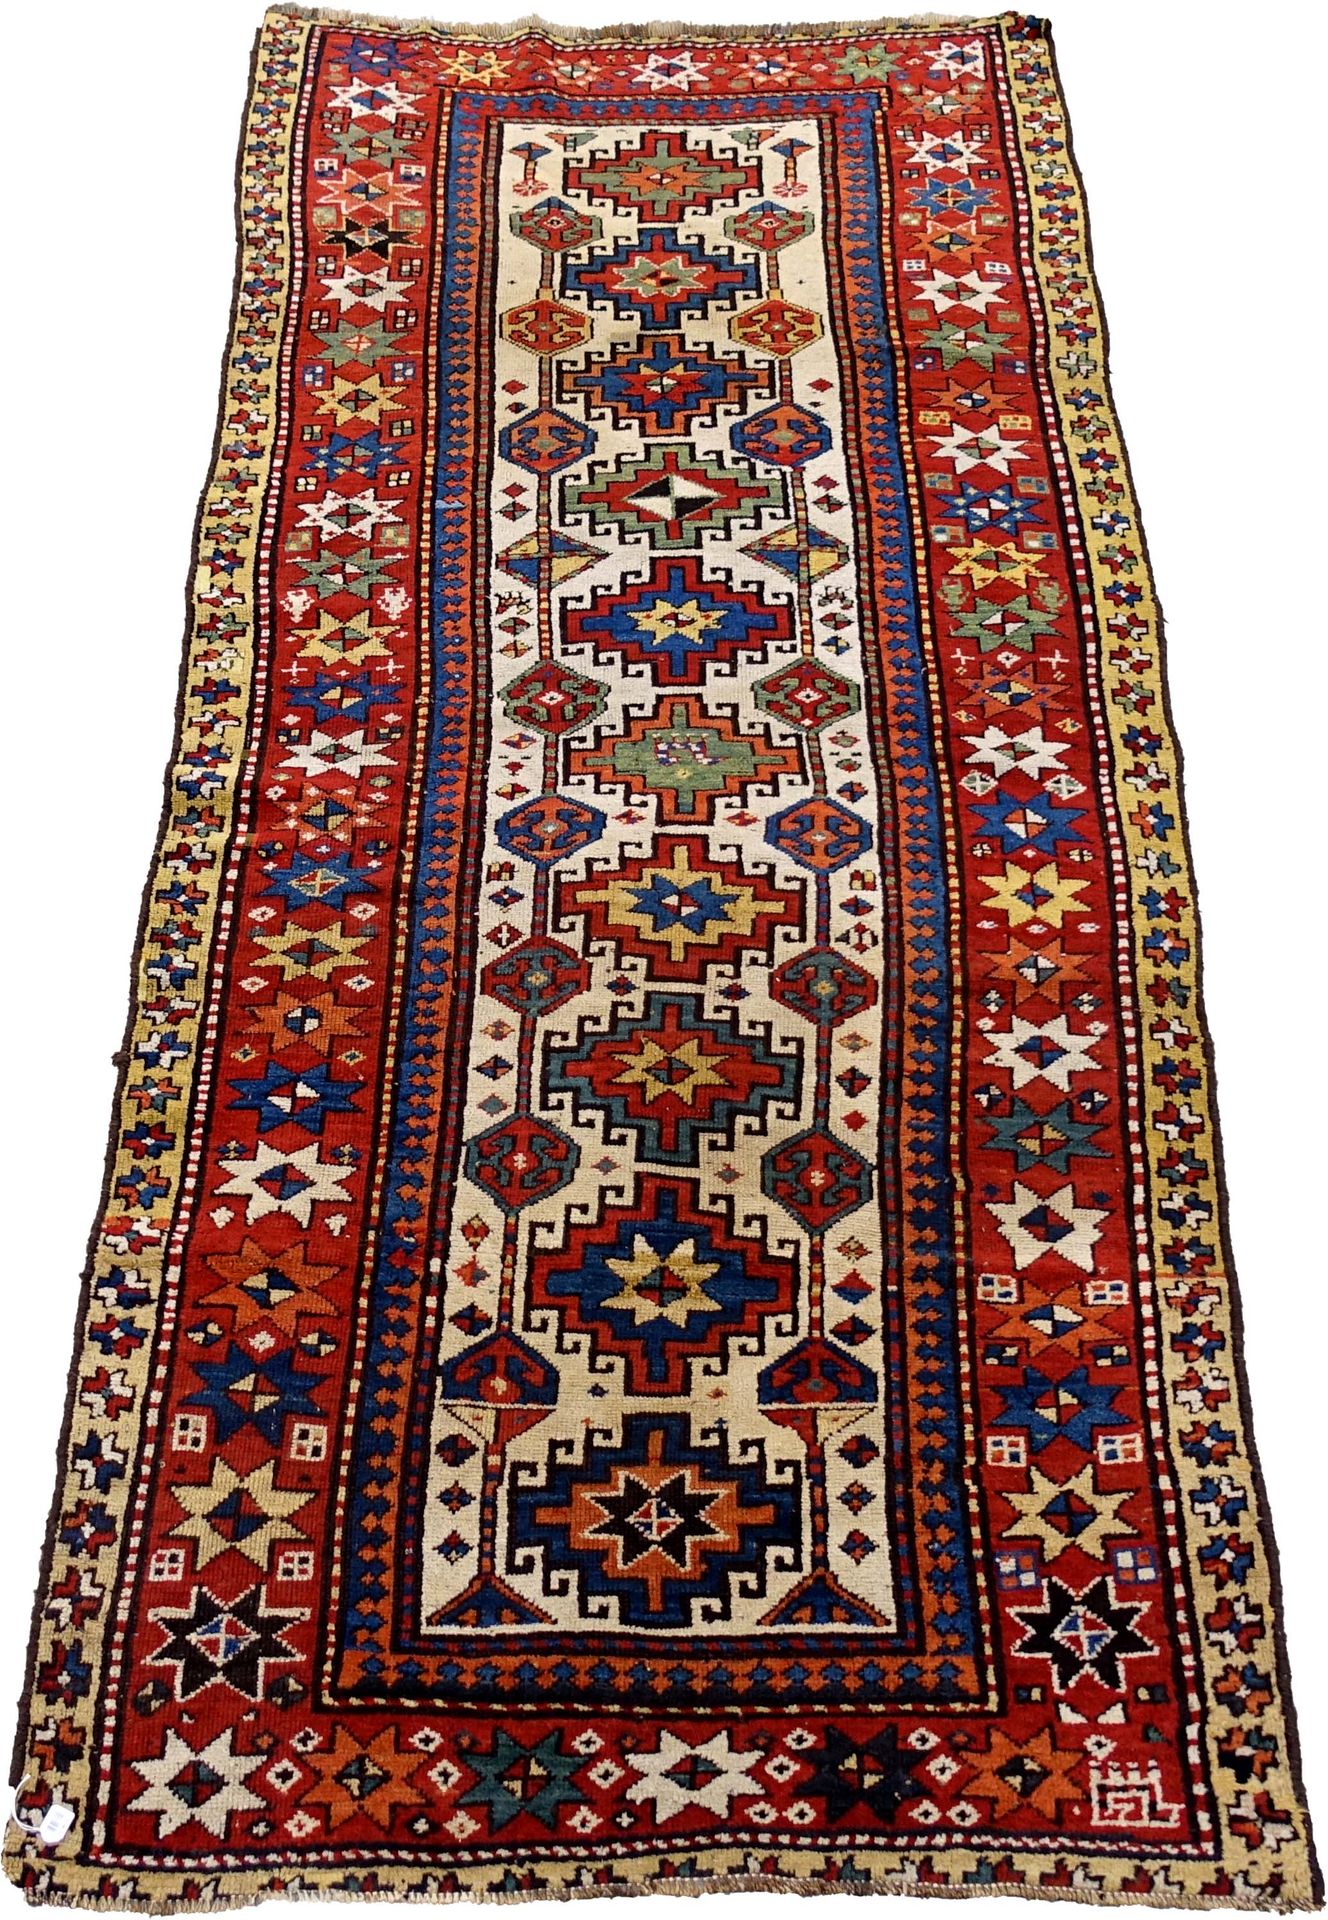 Tapis Caucase-Kazak. The background is clear and presents a series of ten medall&hellip;